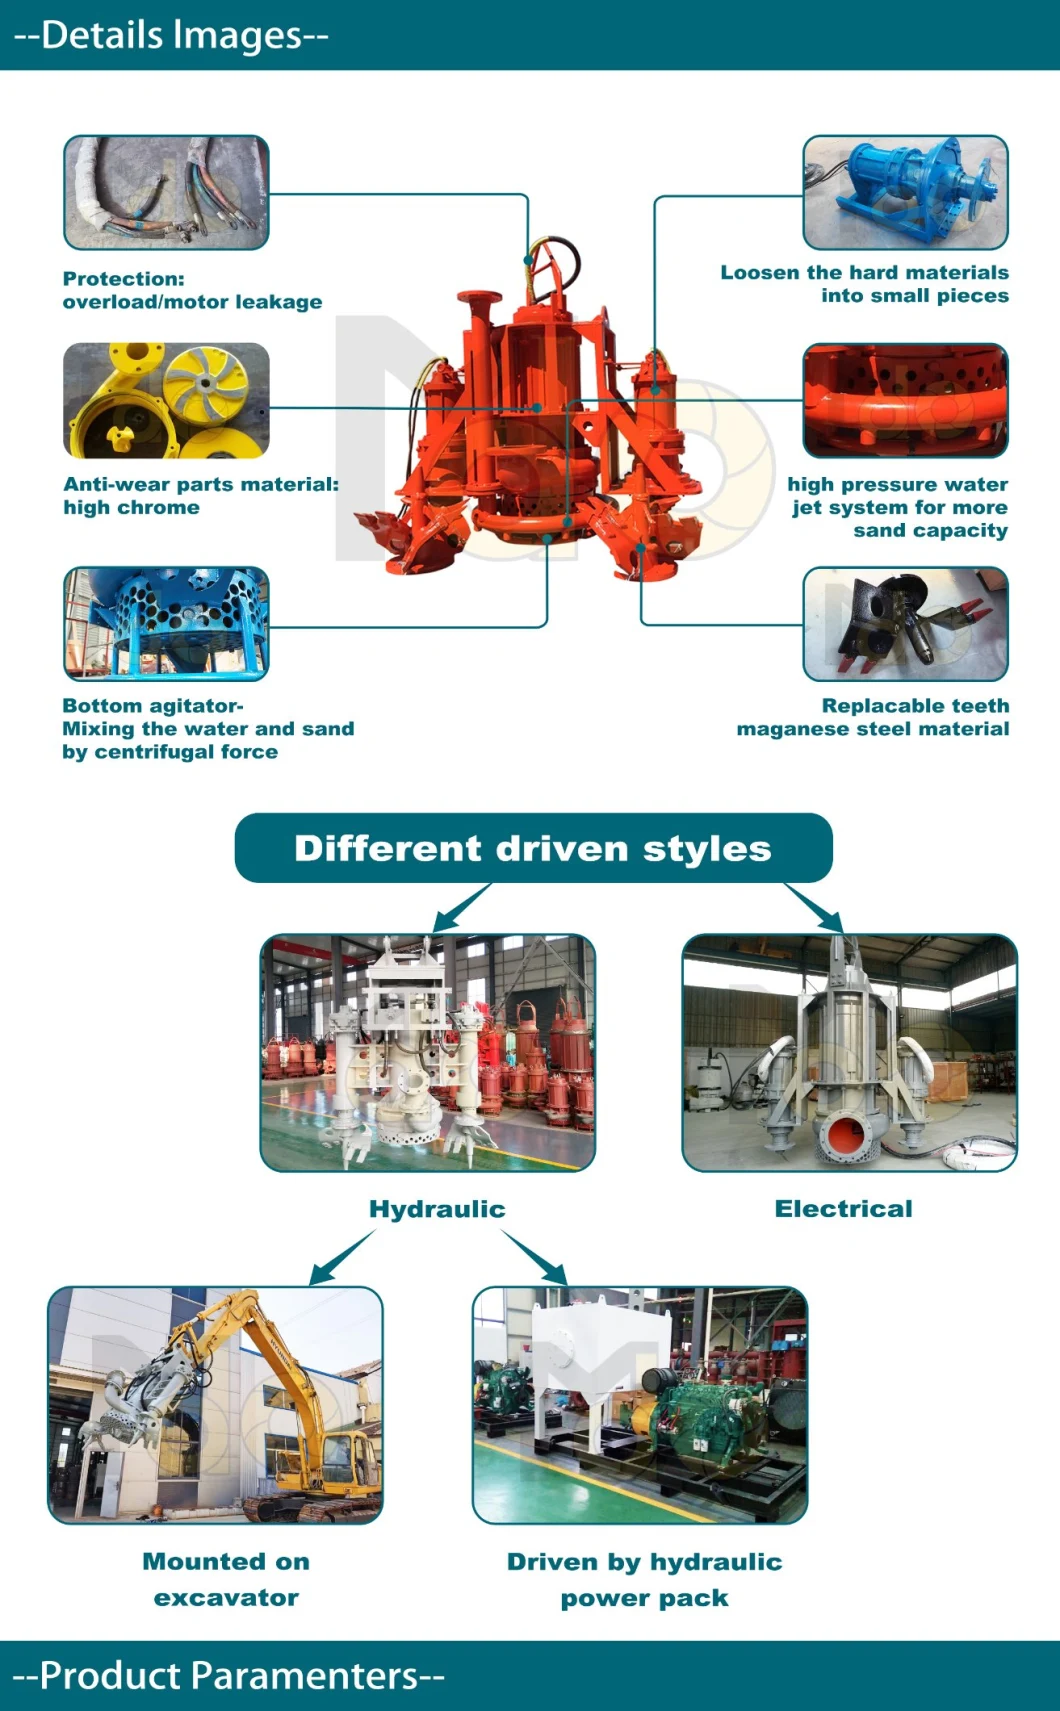 The Best High Pressure Heavy Duty Submersible Vertical Submersible Slurry Pump for Industry